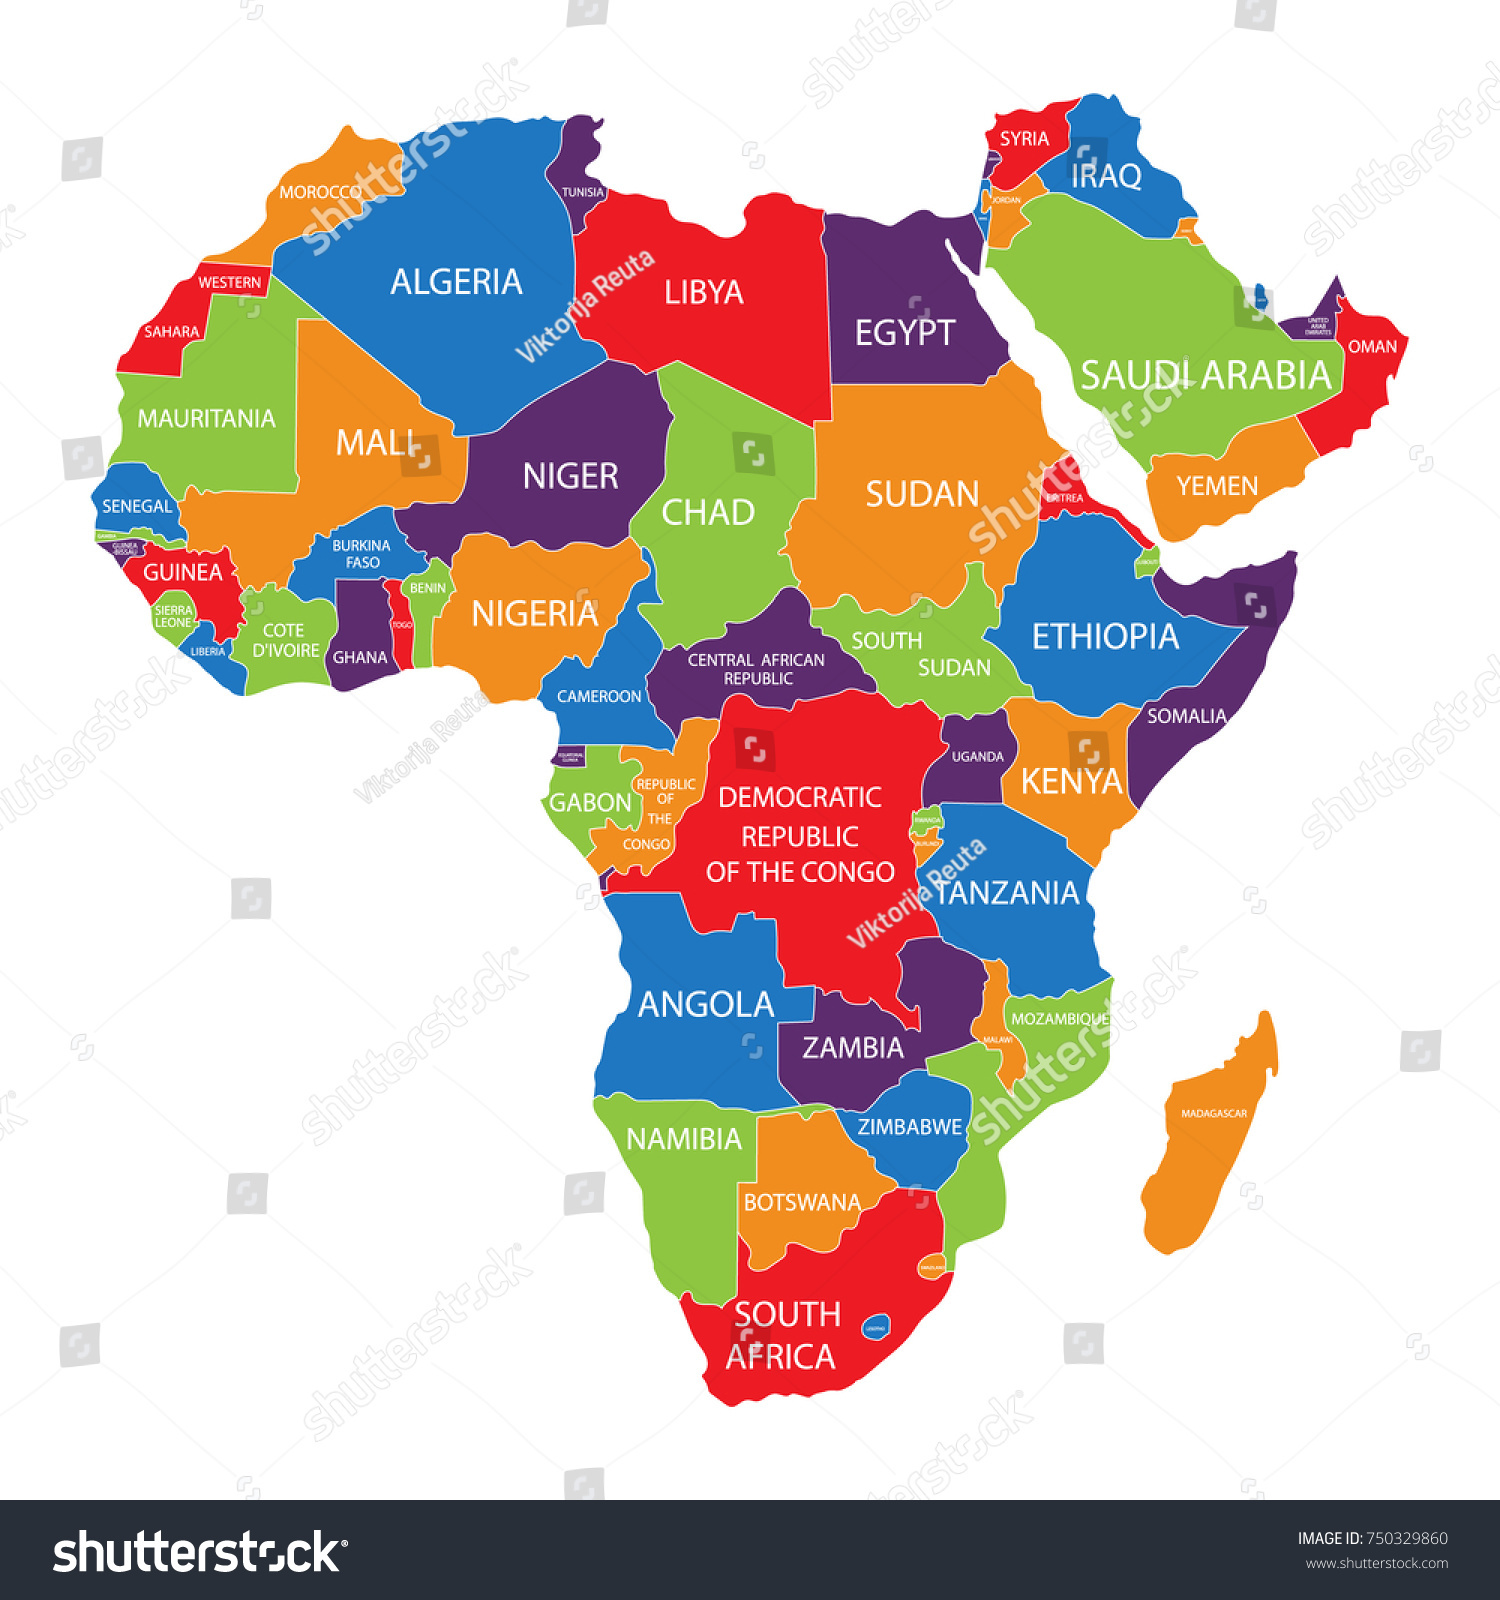 Vector Illustration Africa Map Countries Names Stock Vector Royalty Free